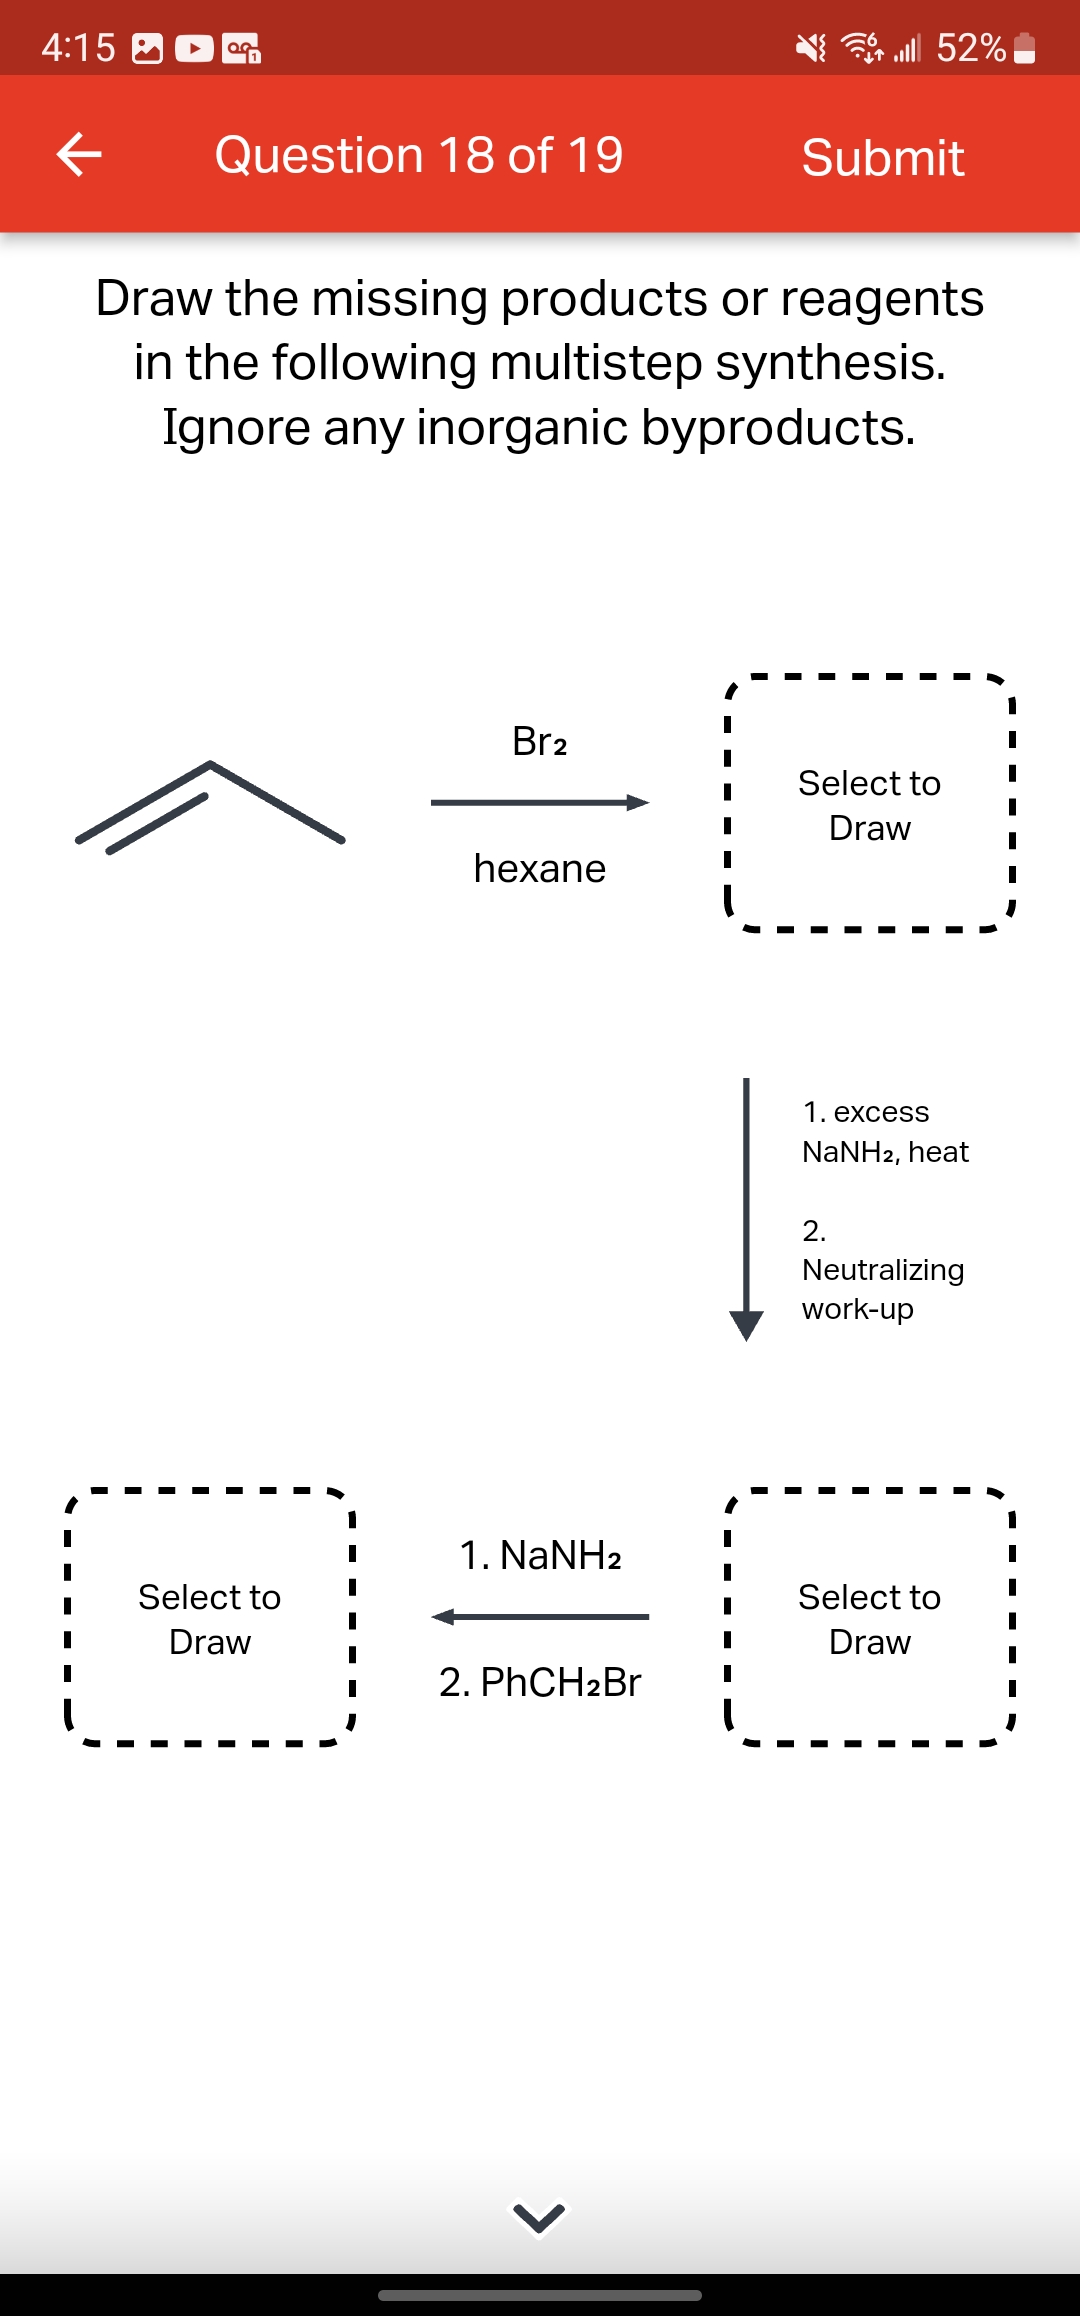 4:15
OG
← Question 18 of 19
Select to
Draw
Draw the missing products or reagents
in the following multistep synthesis.
Ignore any inorganic byproducts.
Br2
hexane
1. NaNH2
2. PhCH2Br
>
lll 52%
Submit
Select to
Draw
1. excess
NaNH2, heat
2.
Neutralizing
work-up
Select to
Draw